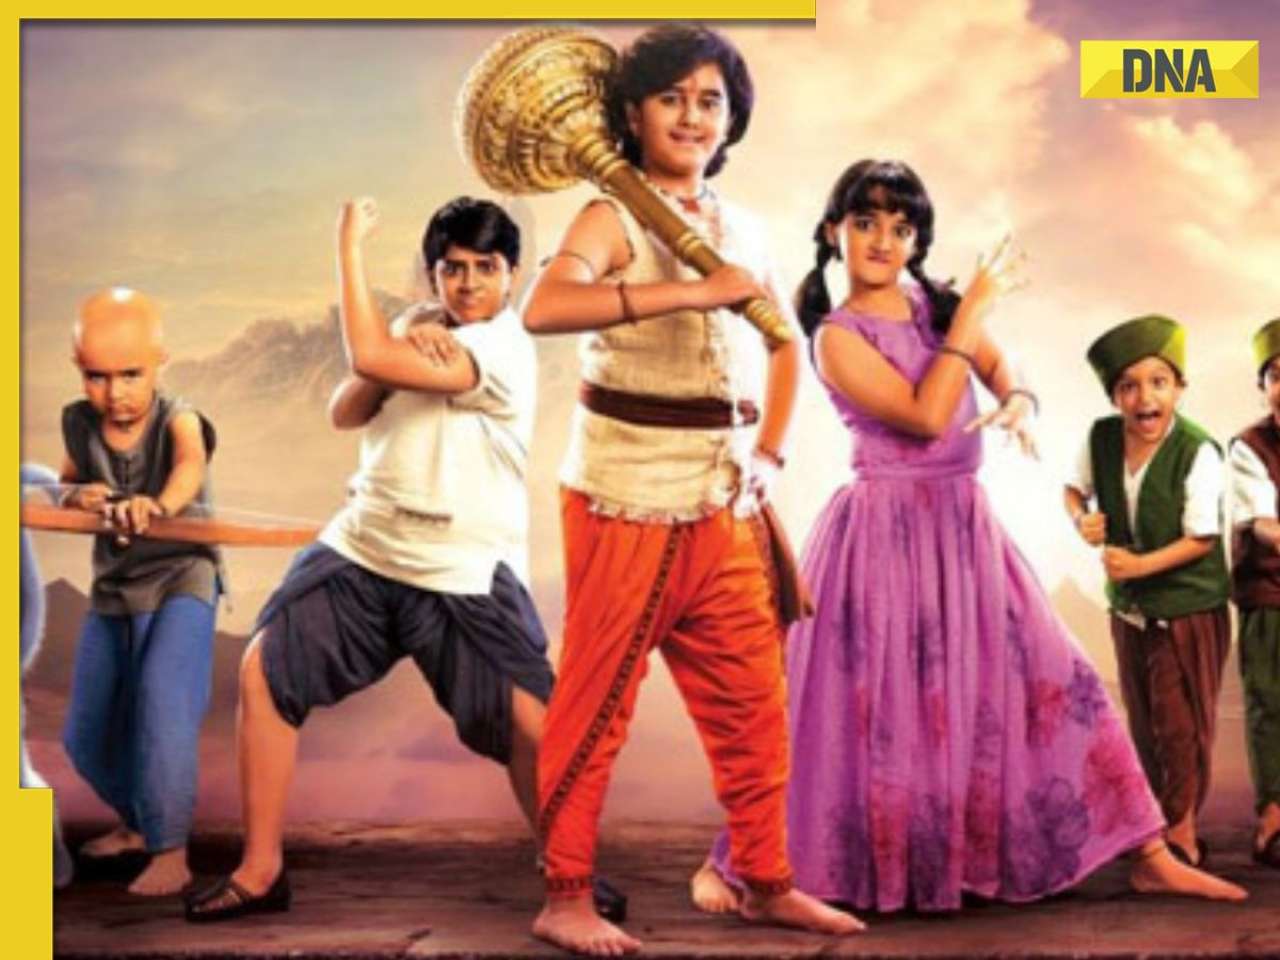 Chhota Bheem and the Curse of Damyaan: An epic adventure for the whole family